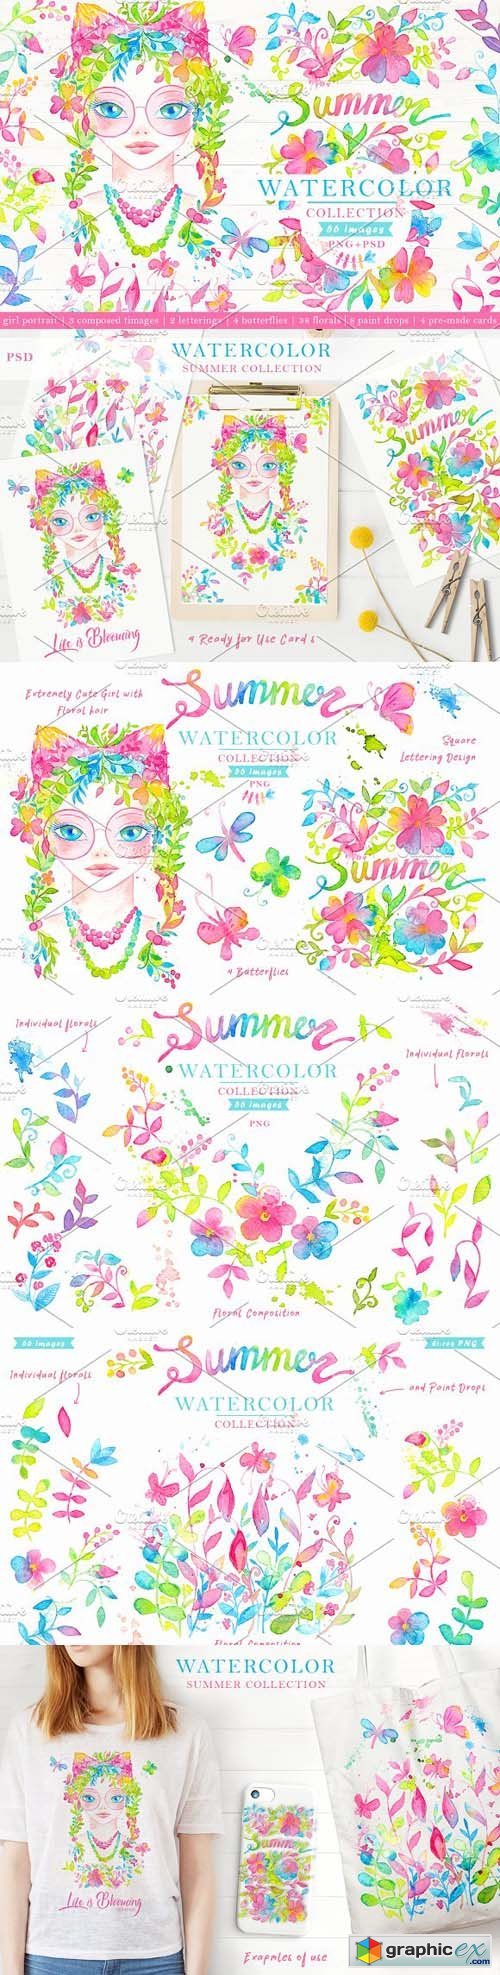 Watercolor Summer Collection